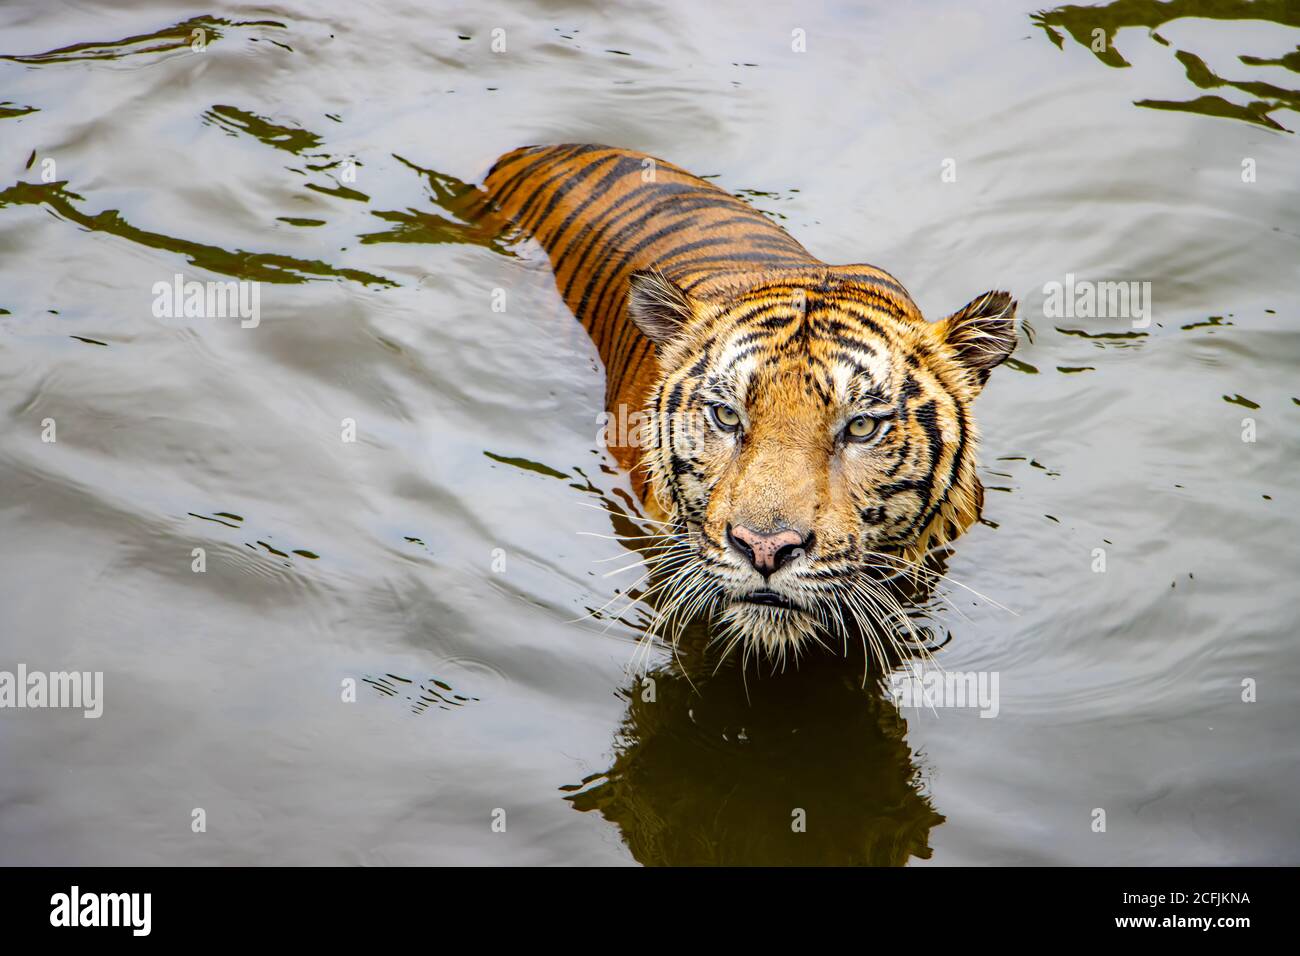 The tiger swims on the water. The tiger stands in the water and looks i front. Stock Photo